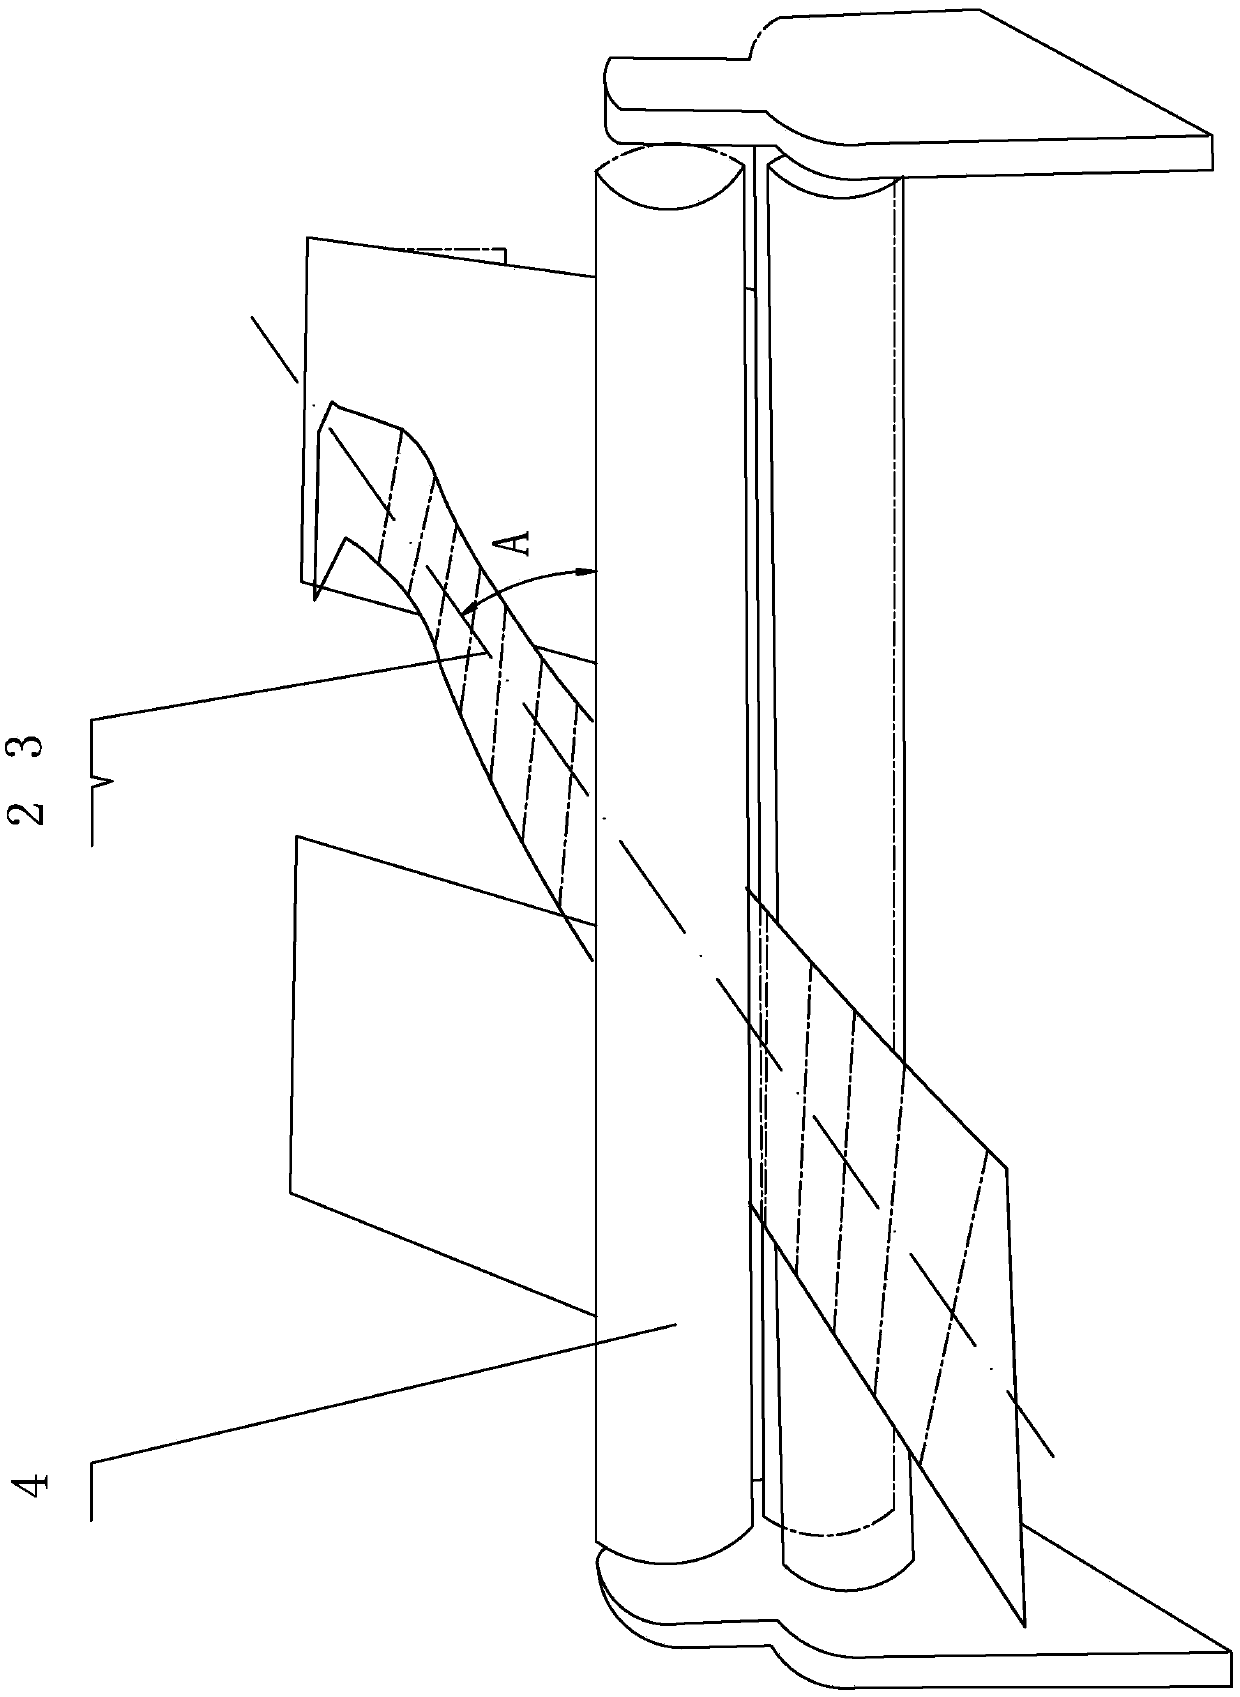 Manufacturing method of non-uniform crankle box girder rotary ladder